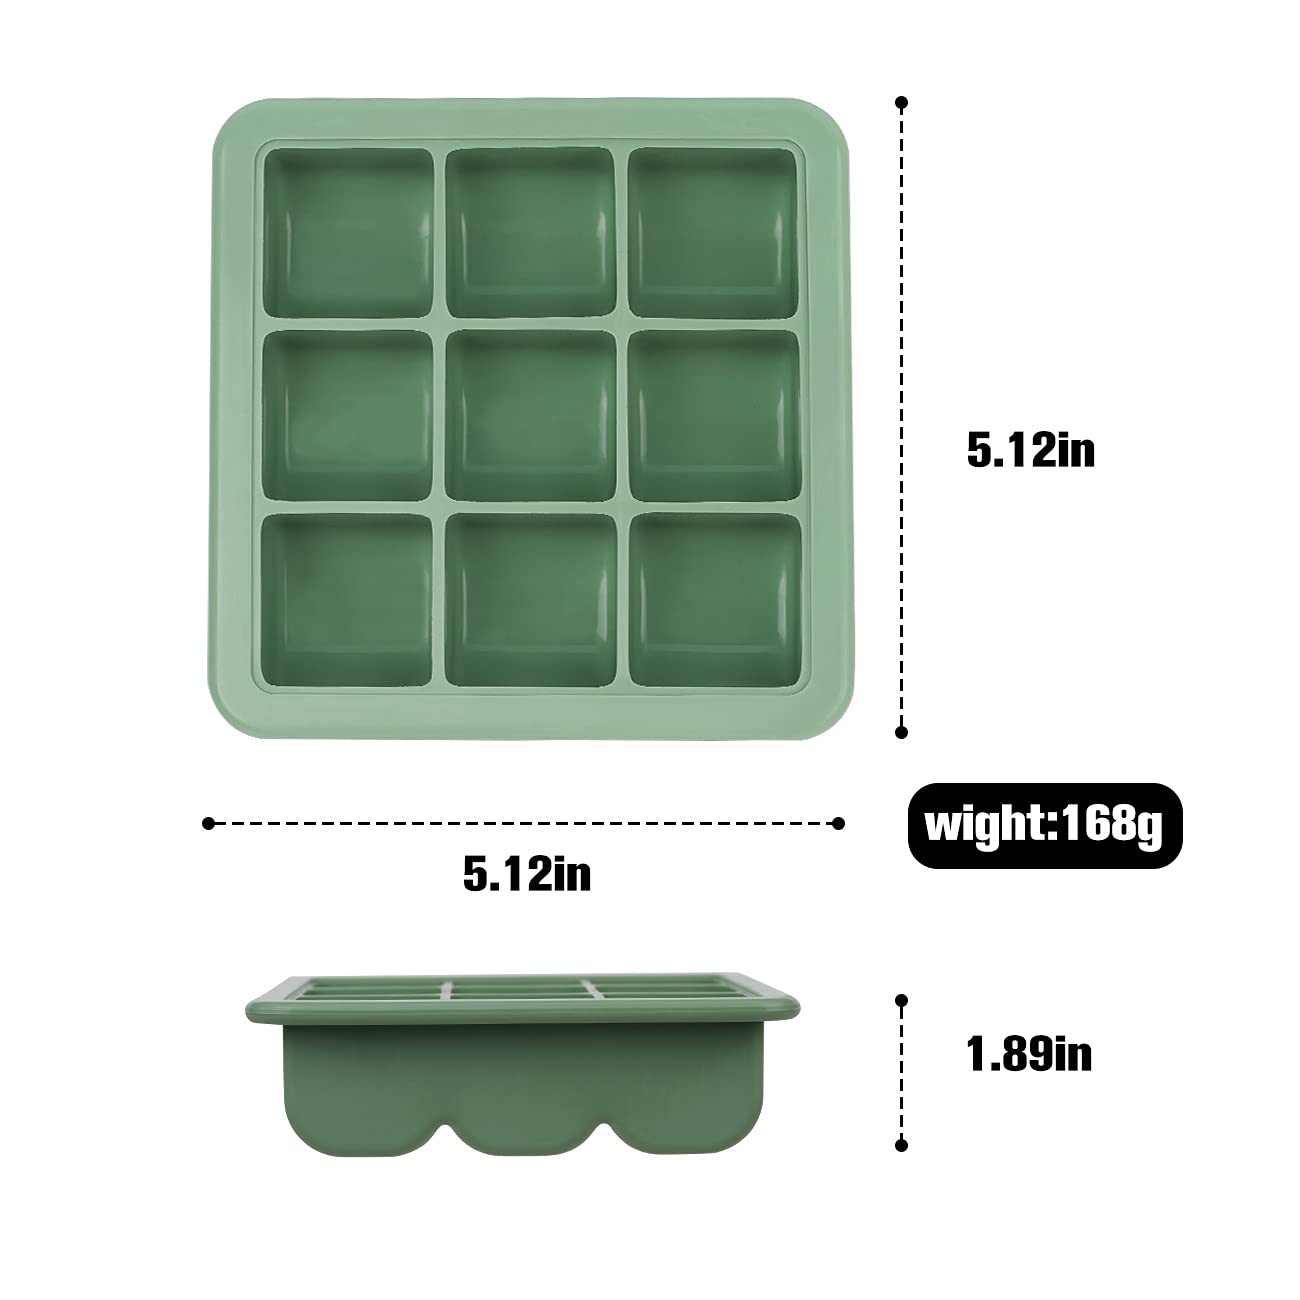 haakaa Baby Food and Breast Milk Freezer Tray, Silicone Freezer Tray with Lid, Baby Food Storage Container, Perfect for Homemade Baby Food, Vegetable & Fruit Purees, 9 x 1.2 oz, Pea Green : Baby